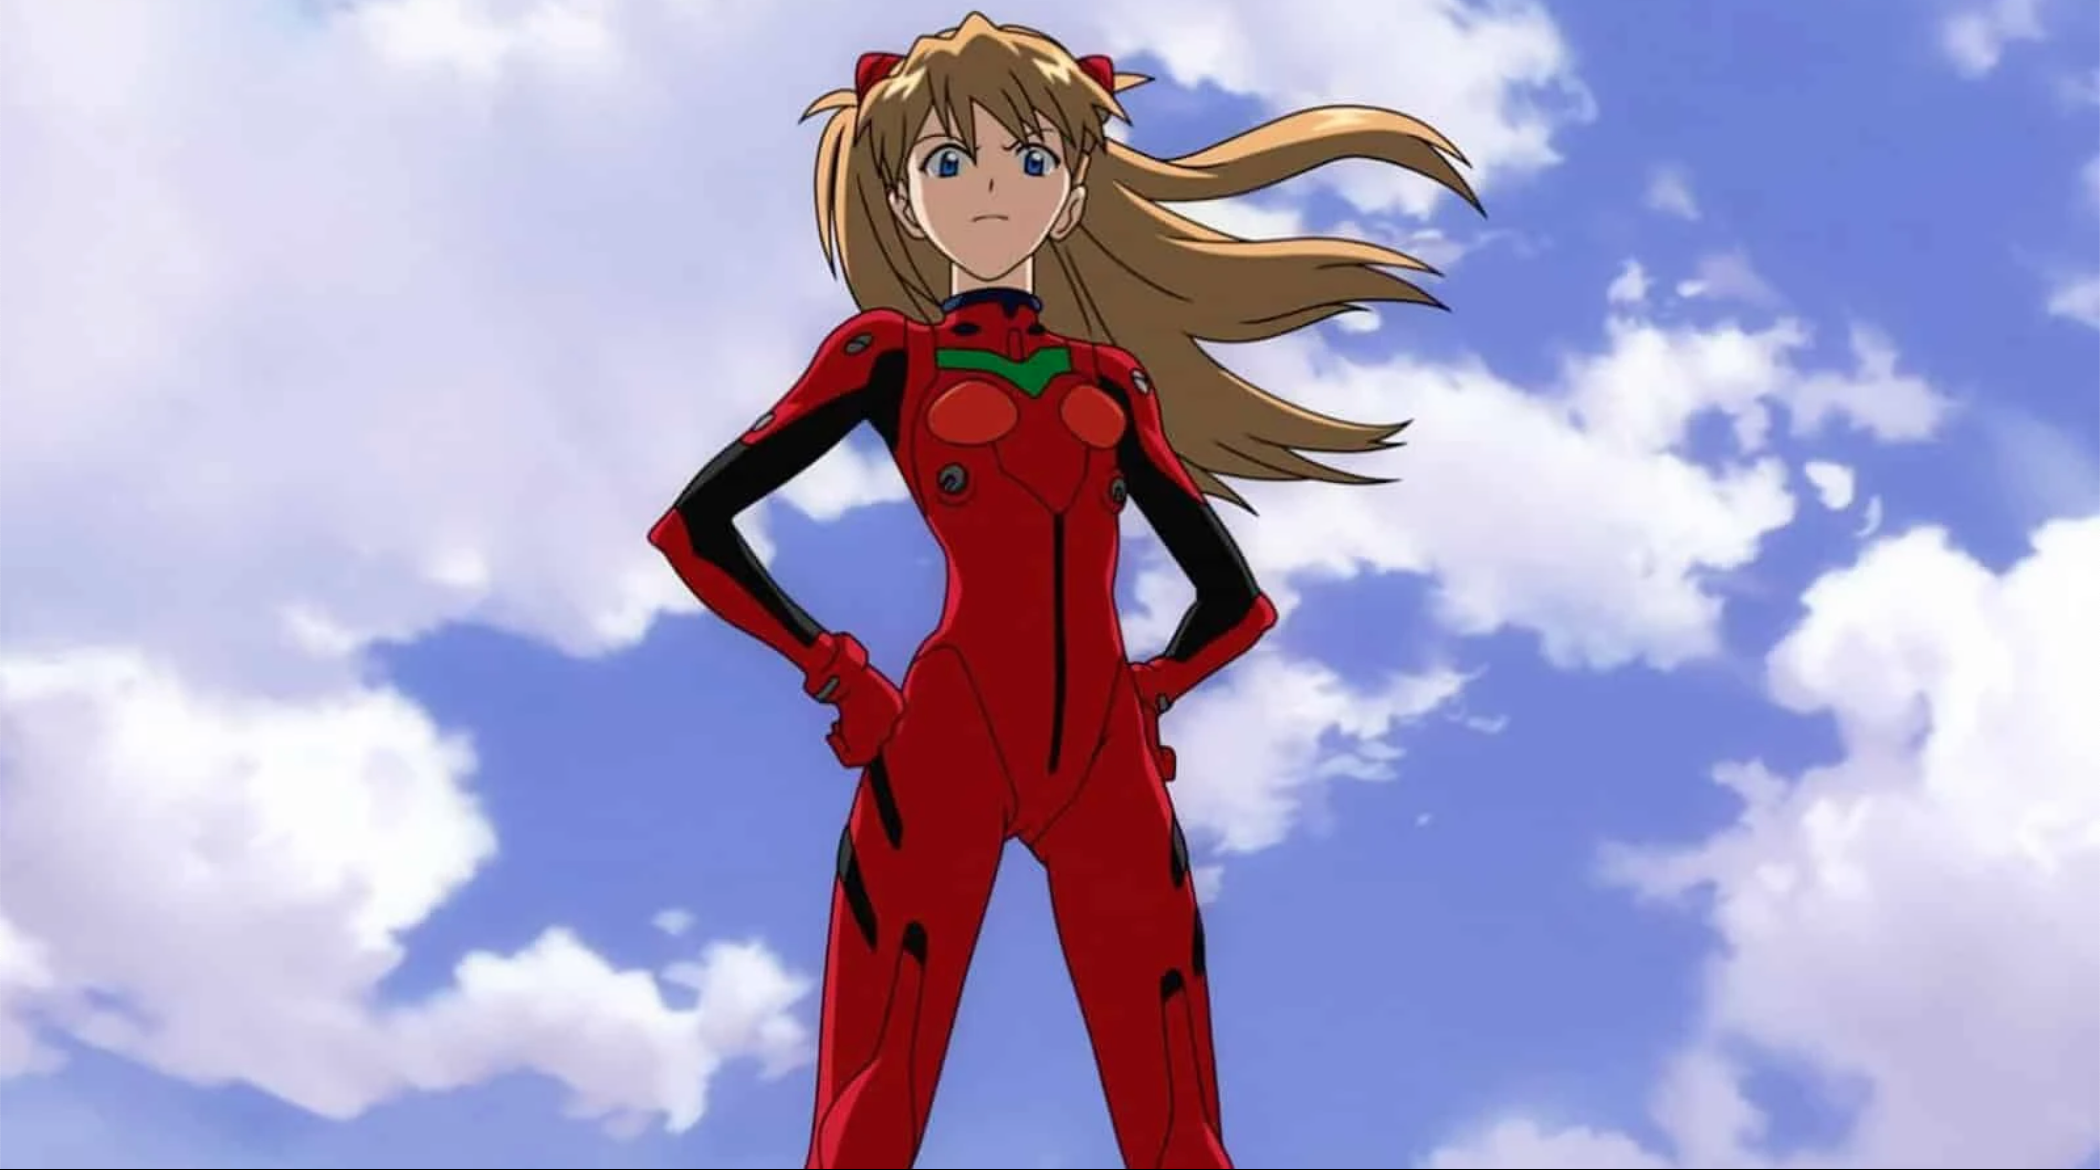 Neon Genesis Evangelion Image from google of a character doing a power pose